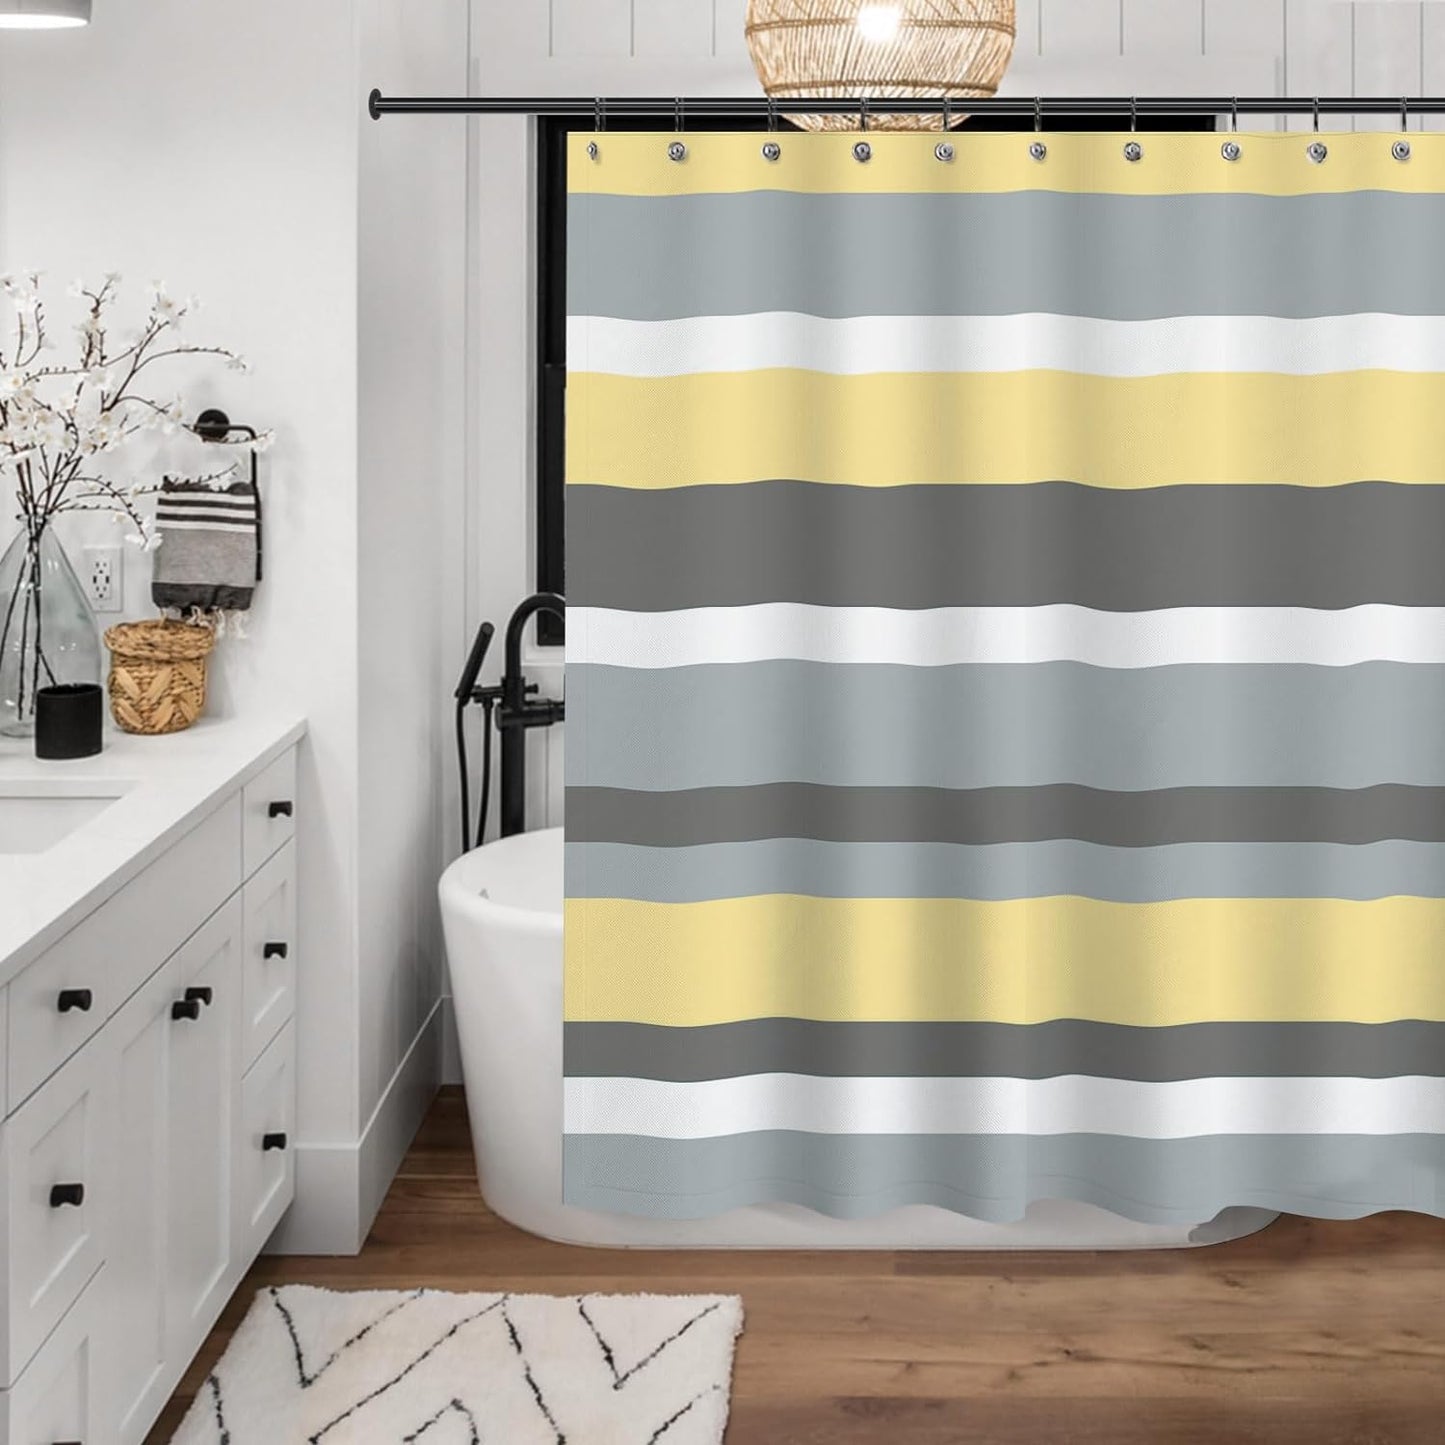 Sunlit Aqua Blue Gray Horizontal Stripes Water-Repellent Fabric Shower Curtain with Reinforced Metal Grommets Refreshing Striped Design Bathroom Decor